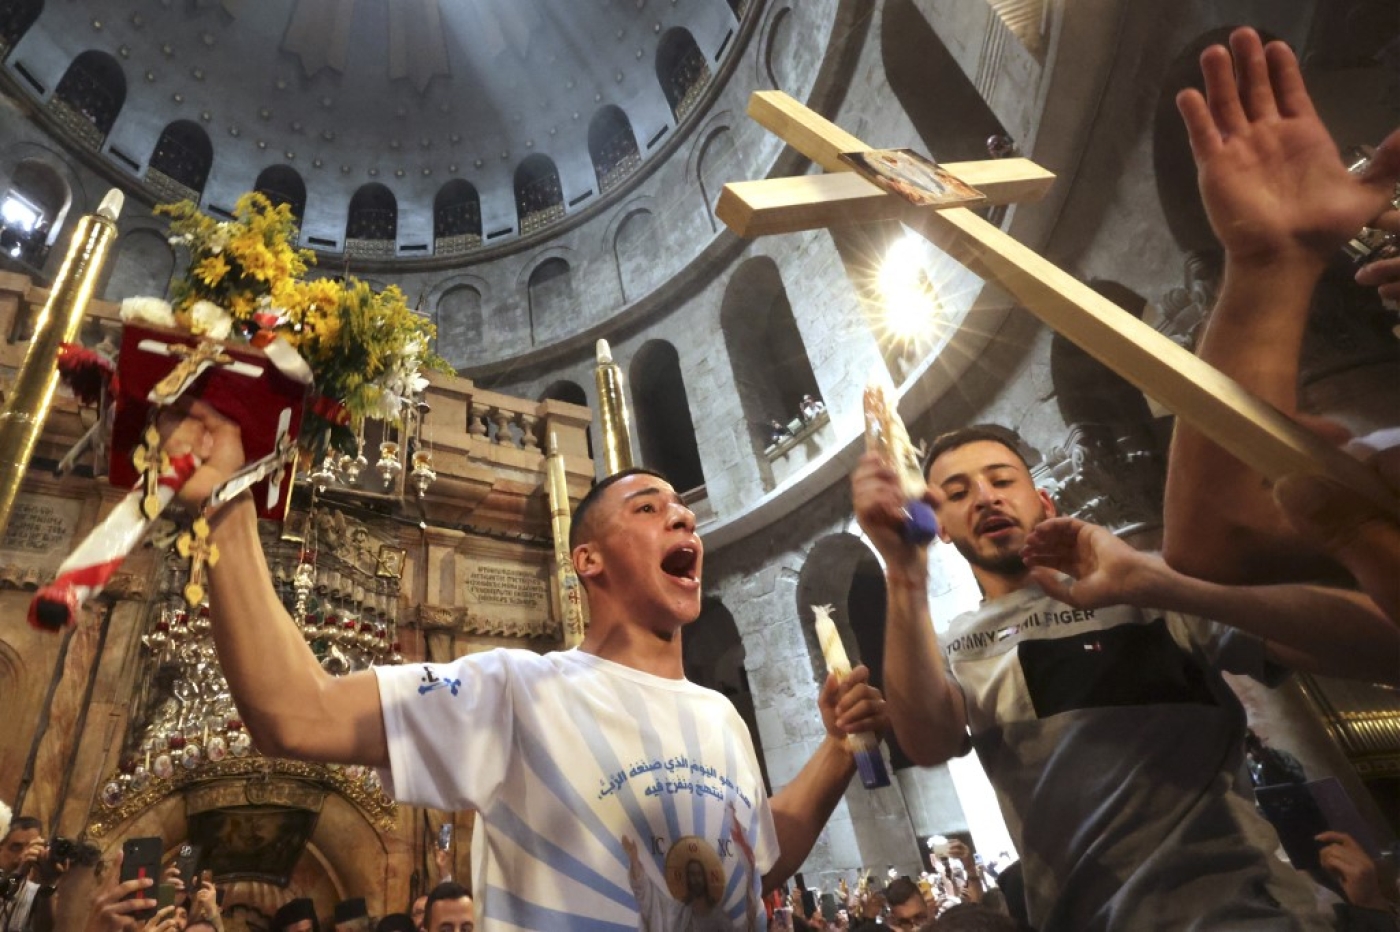 Christians gather around the Edicule, traditionally believed to be the burial site of Jesus Christ, during the Holy Fire ceremony at Jerusalem's Holy Sepulchre church, on 23 April 2022 (AFP)